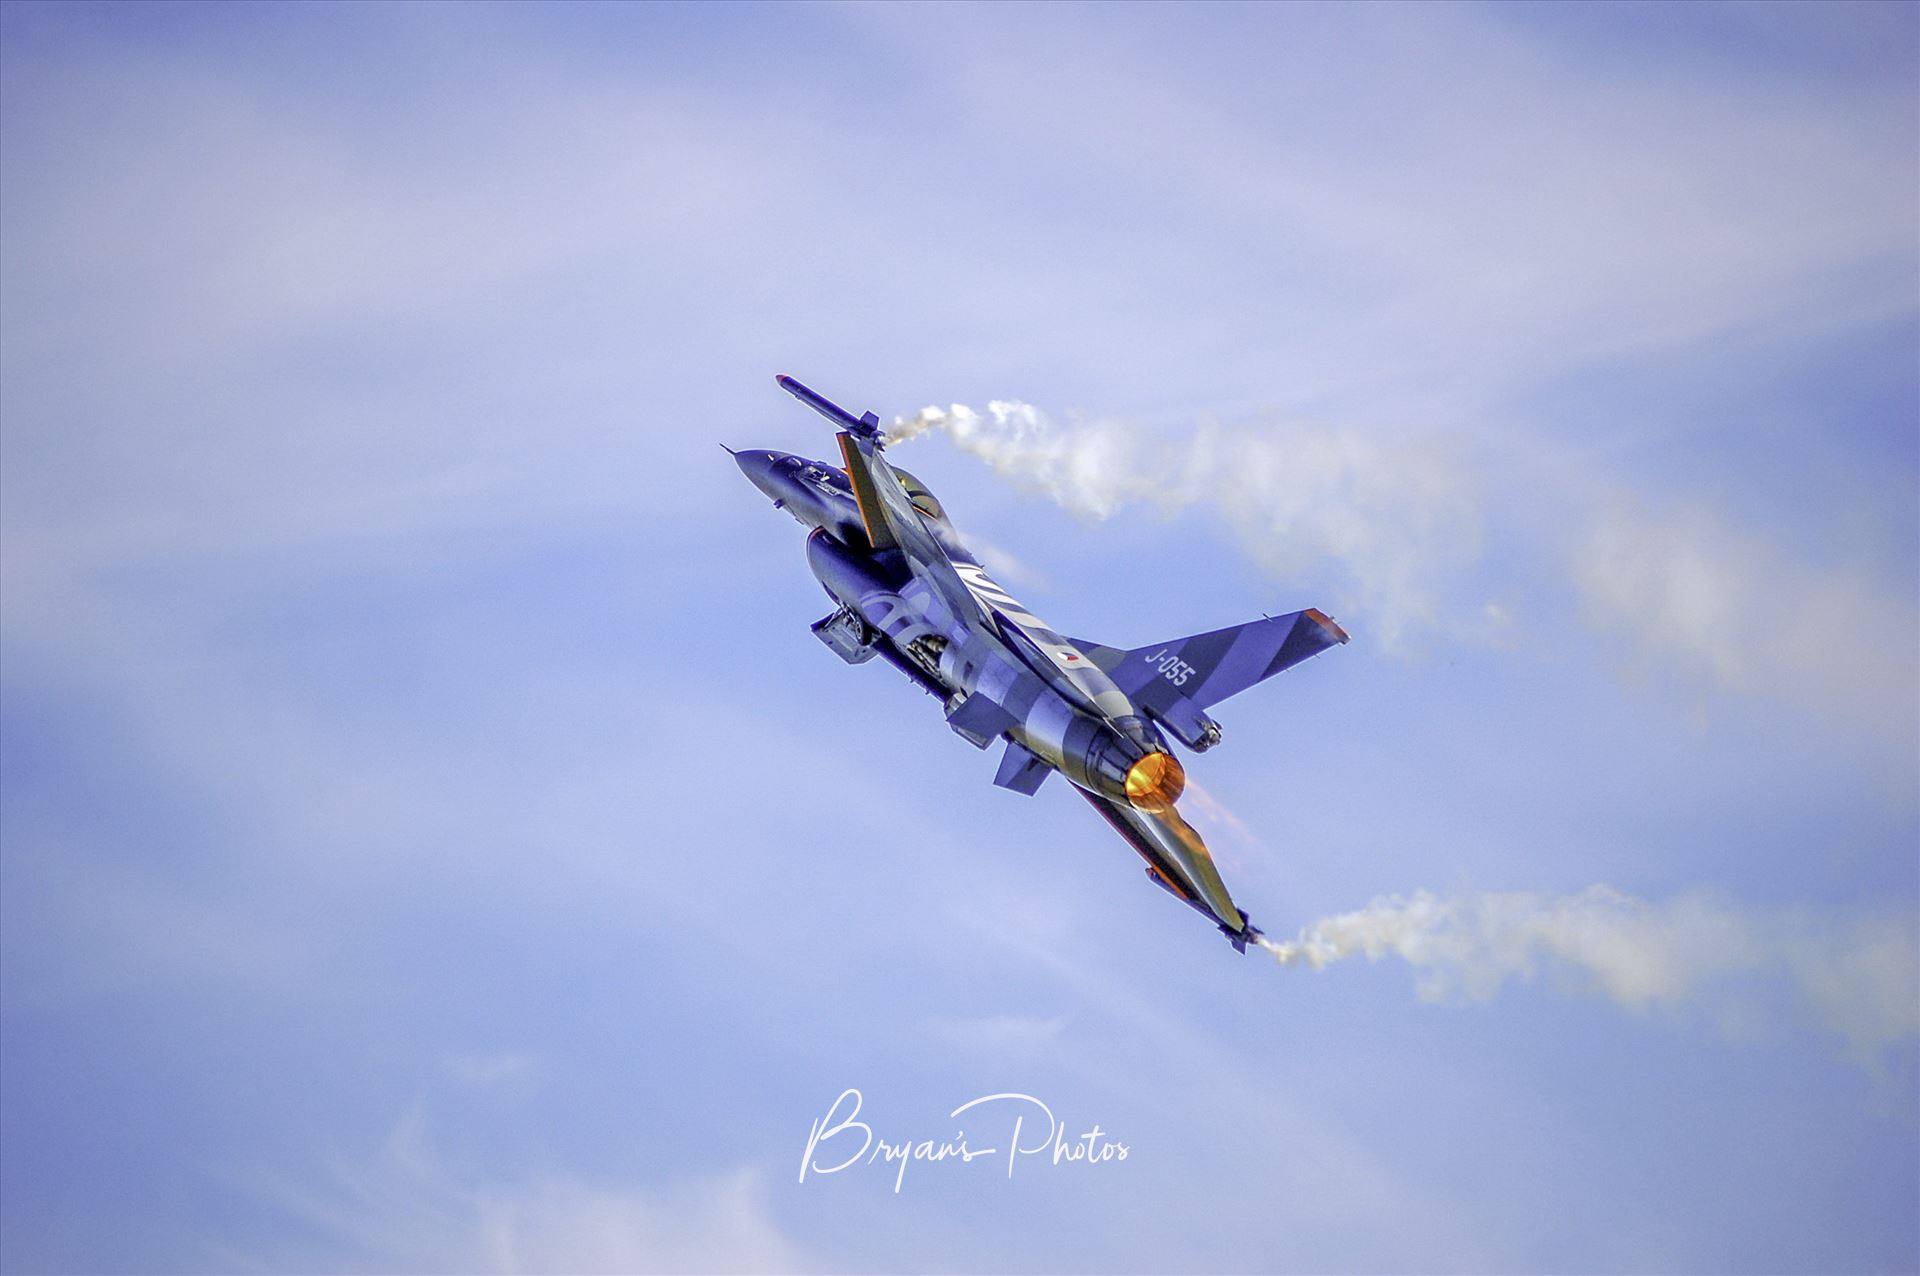 Afterburner Photo of a dutch F16 displaying at air show by Bryans Photos